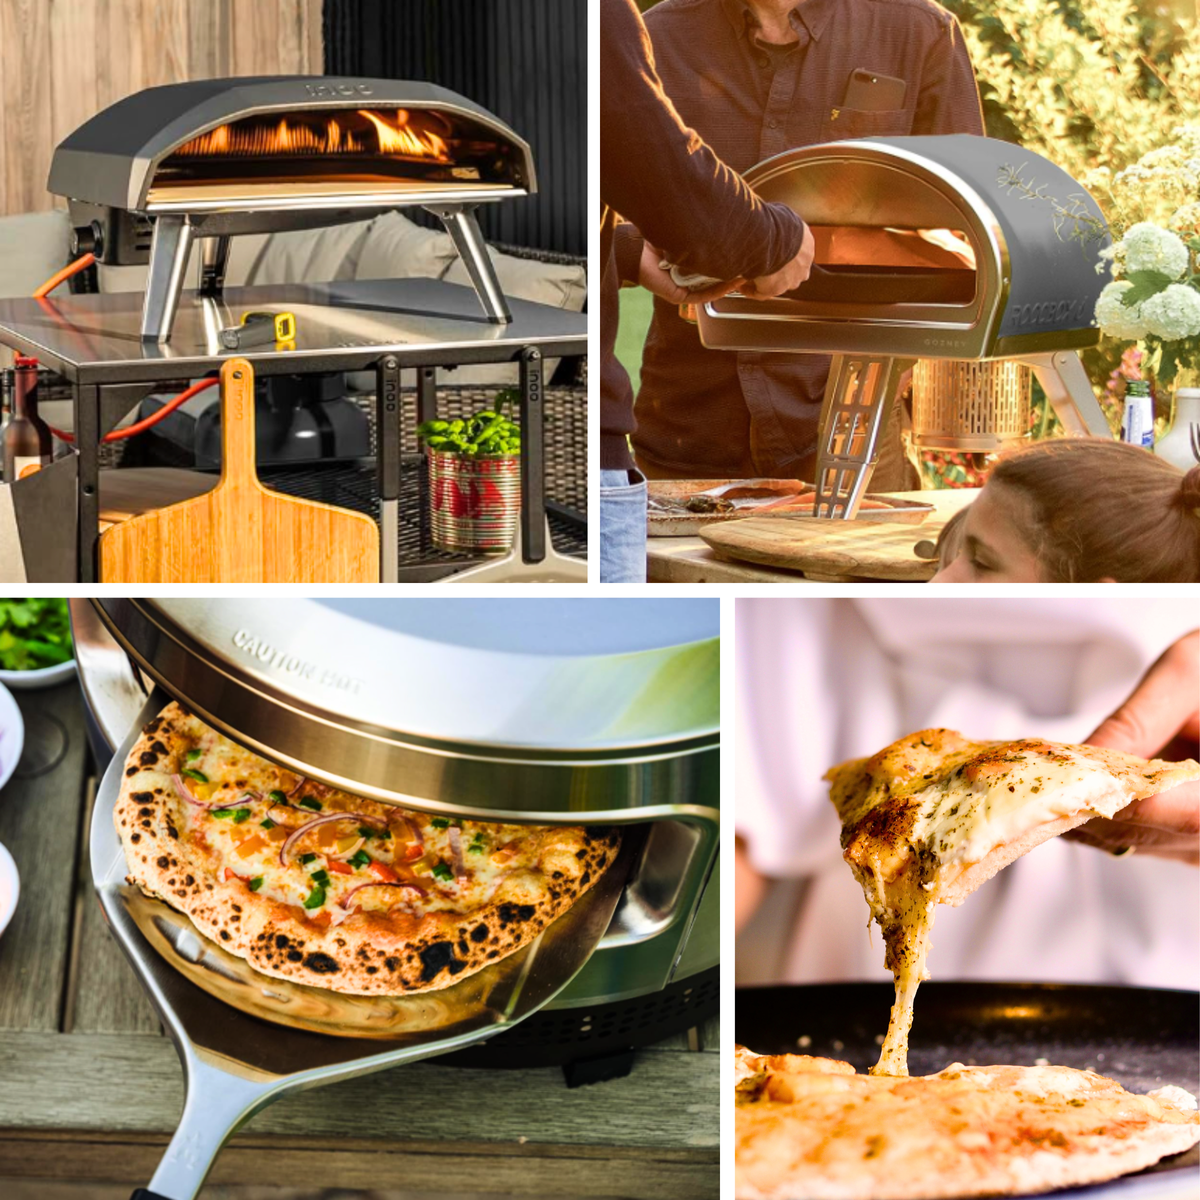 Make Great Pizza With a Propane Pizza Oven, It's a Gas!